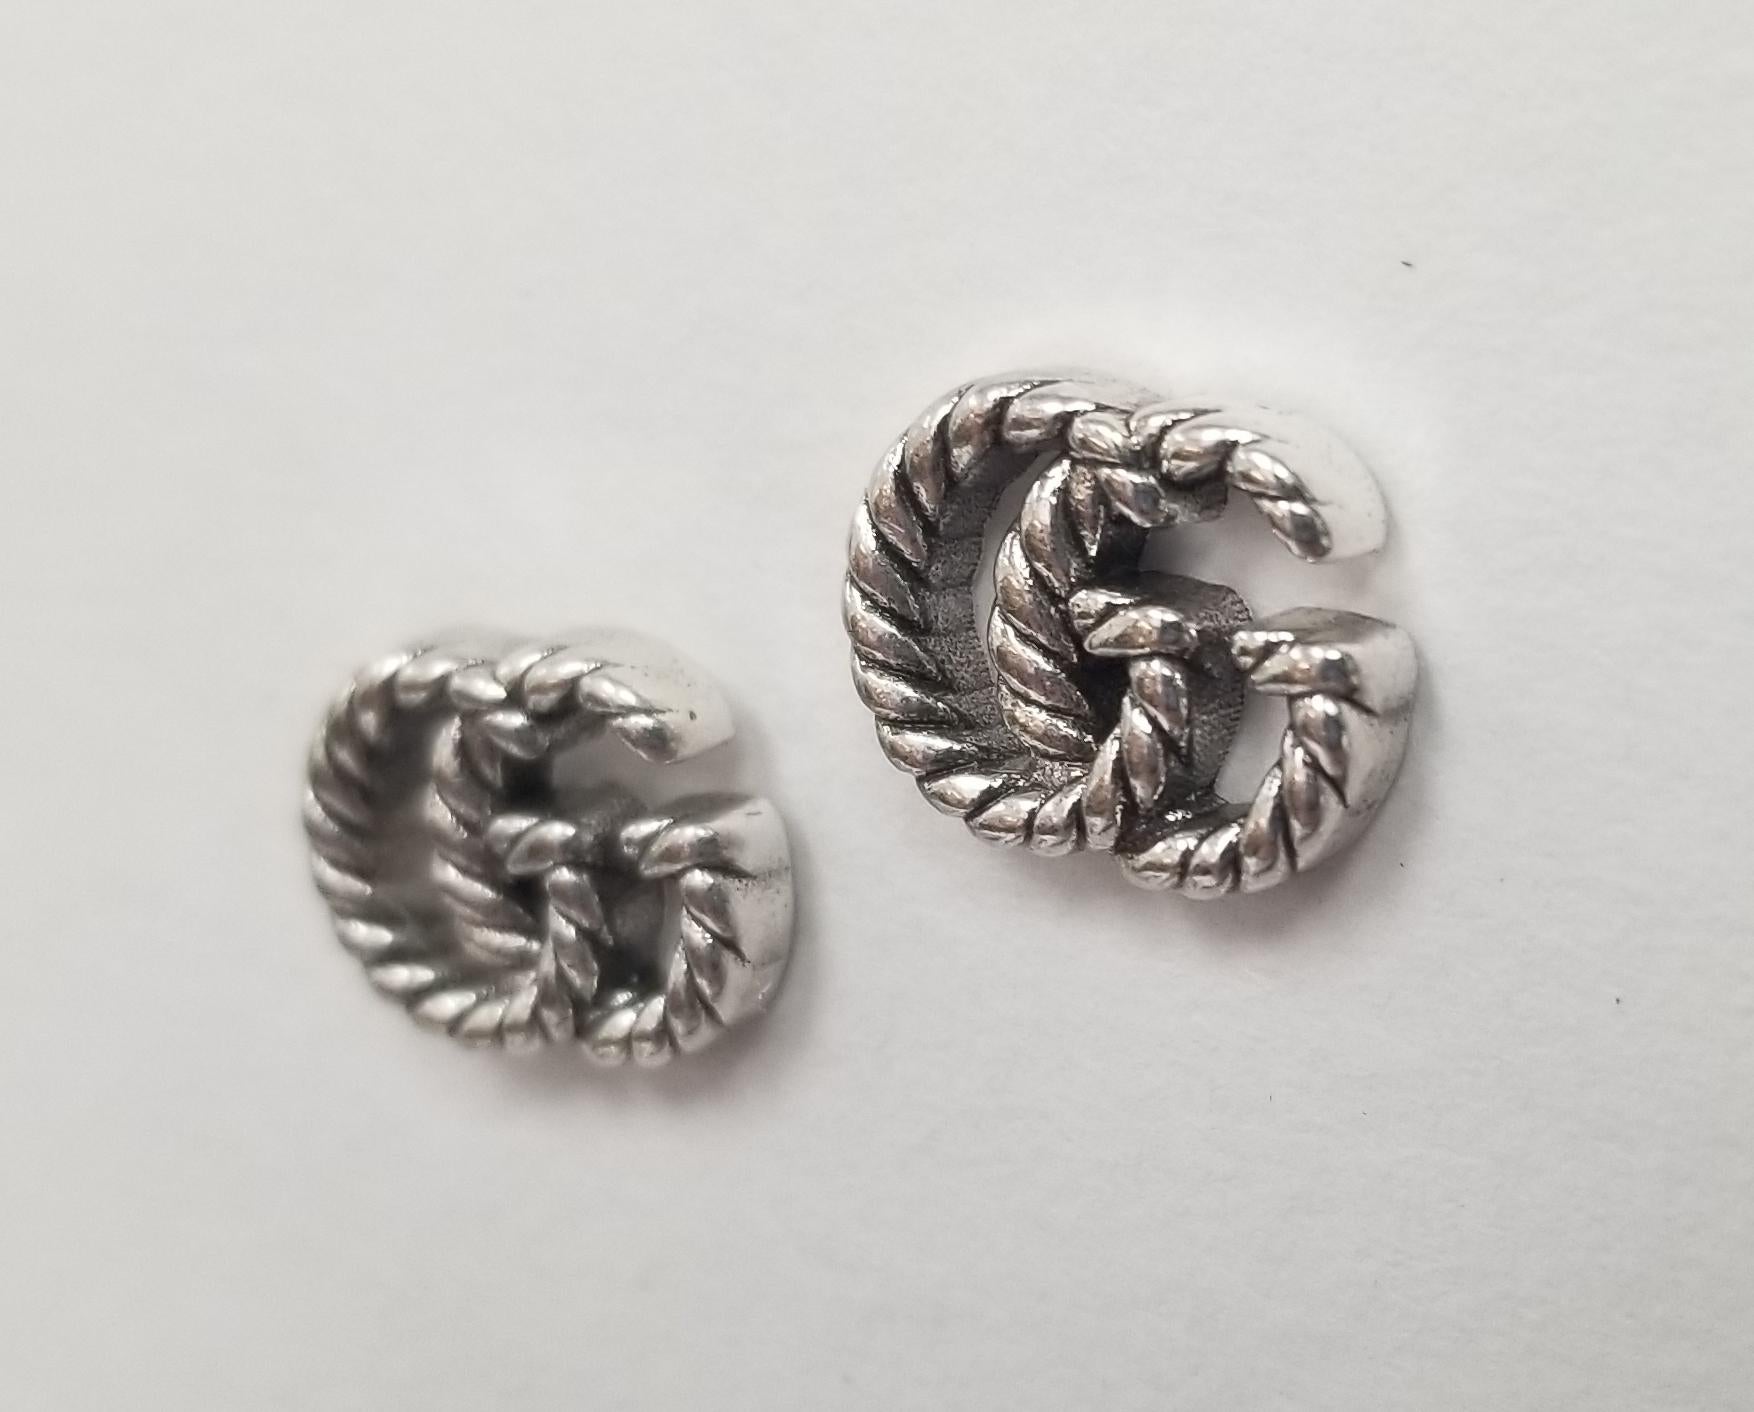  Specification
    Category Earrings
    Brand GUCCI
    Recipient For Her, For Him
    Earring Style Stud Earrings
    Brand Collections GG Marmont
    Metal Type Sterling Silver
